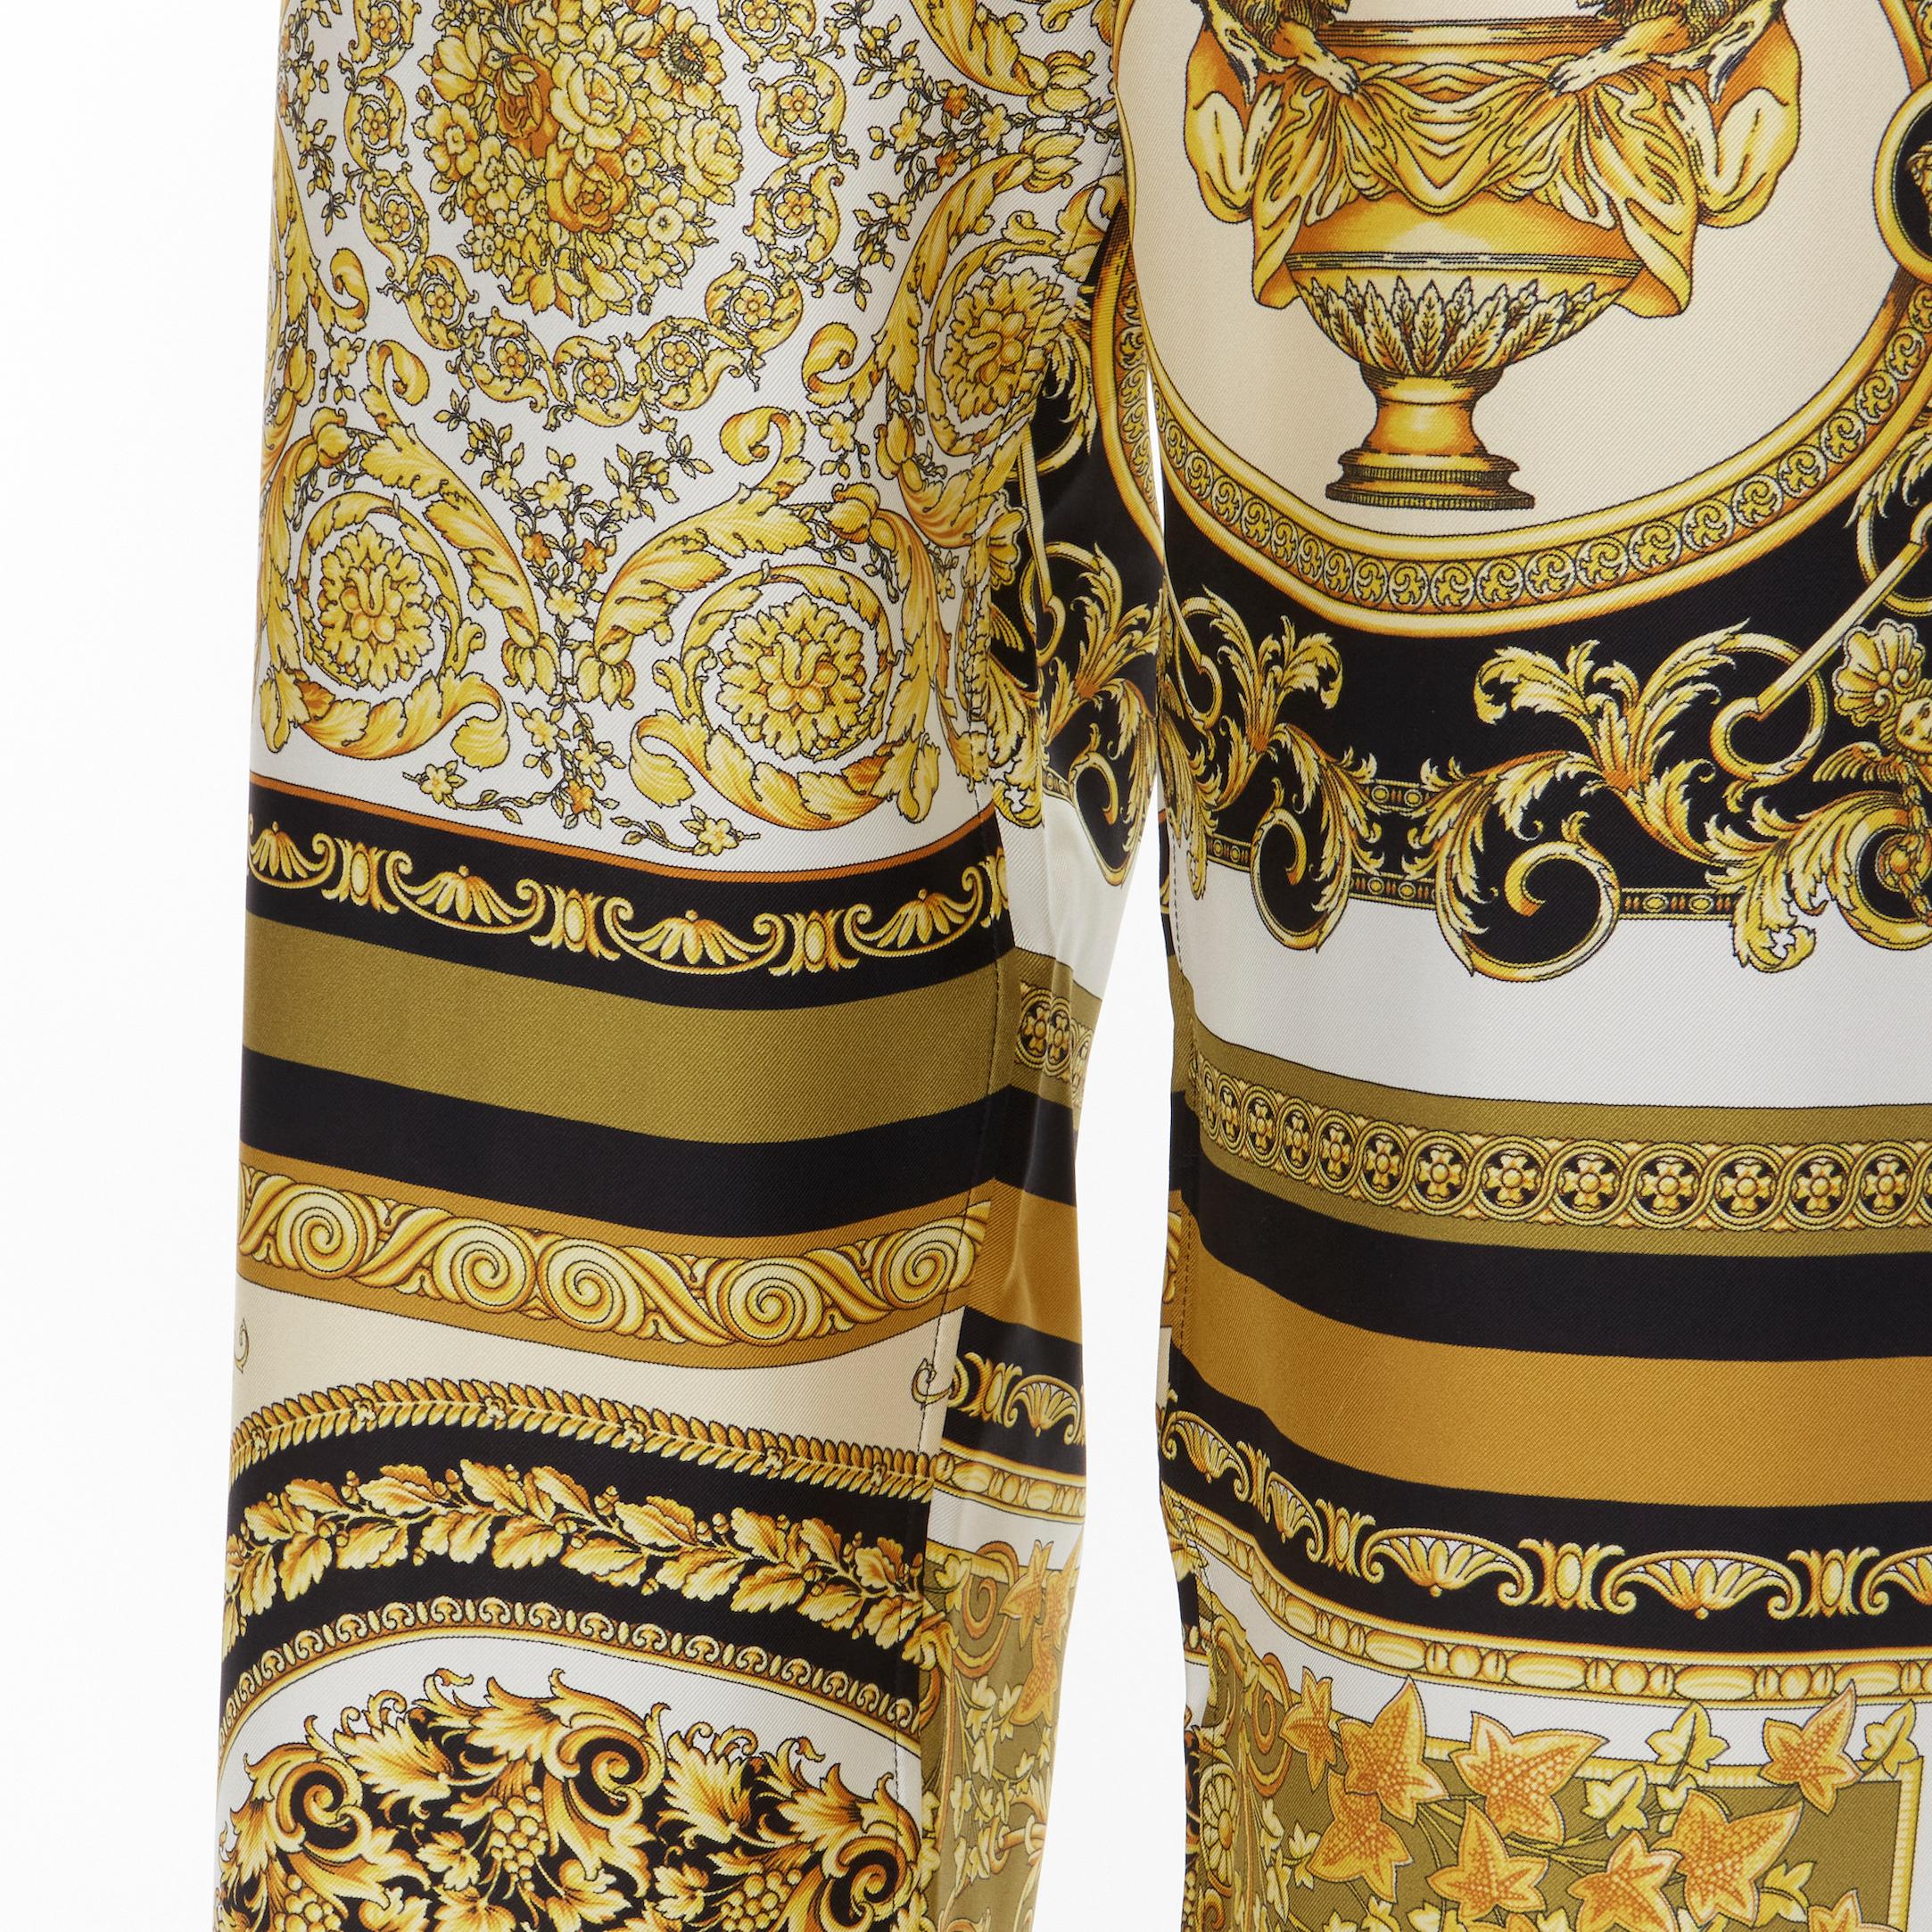 new VERSACE 2021 Mosaic Barocco gold black 100% silk print pajama pants IT2 XS 
Reference: TGAS/C00682 
Brand: Versace 
Designer: Donatella Versace 
Collection: Mosaic Barocco 
Material: Silk 
Color: Gold 
Pattern: Floral 
Closure: Stretch 
Extra